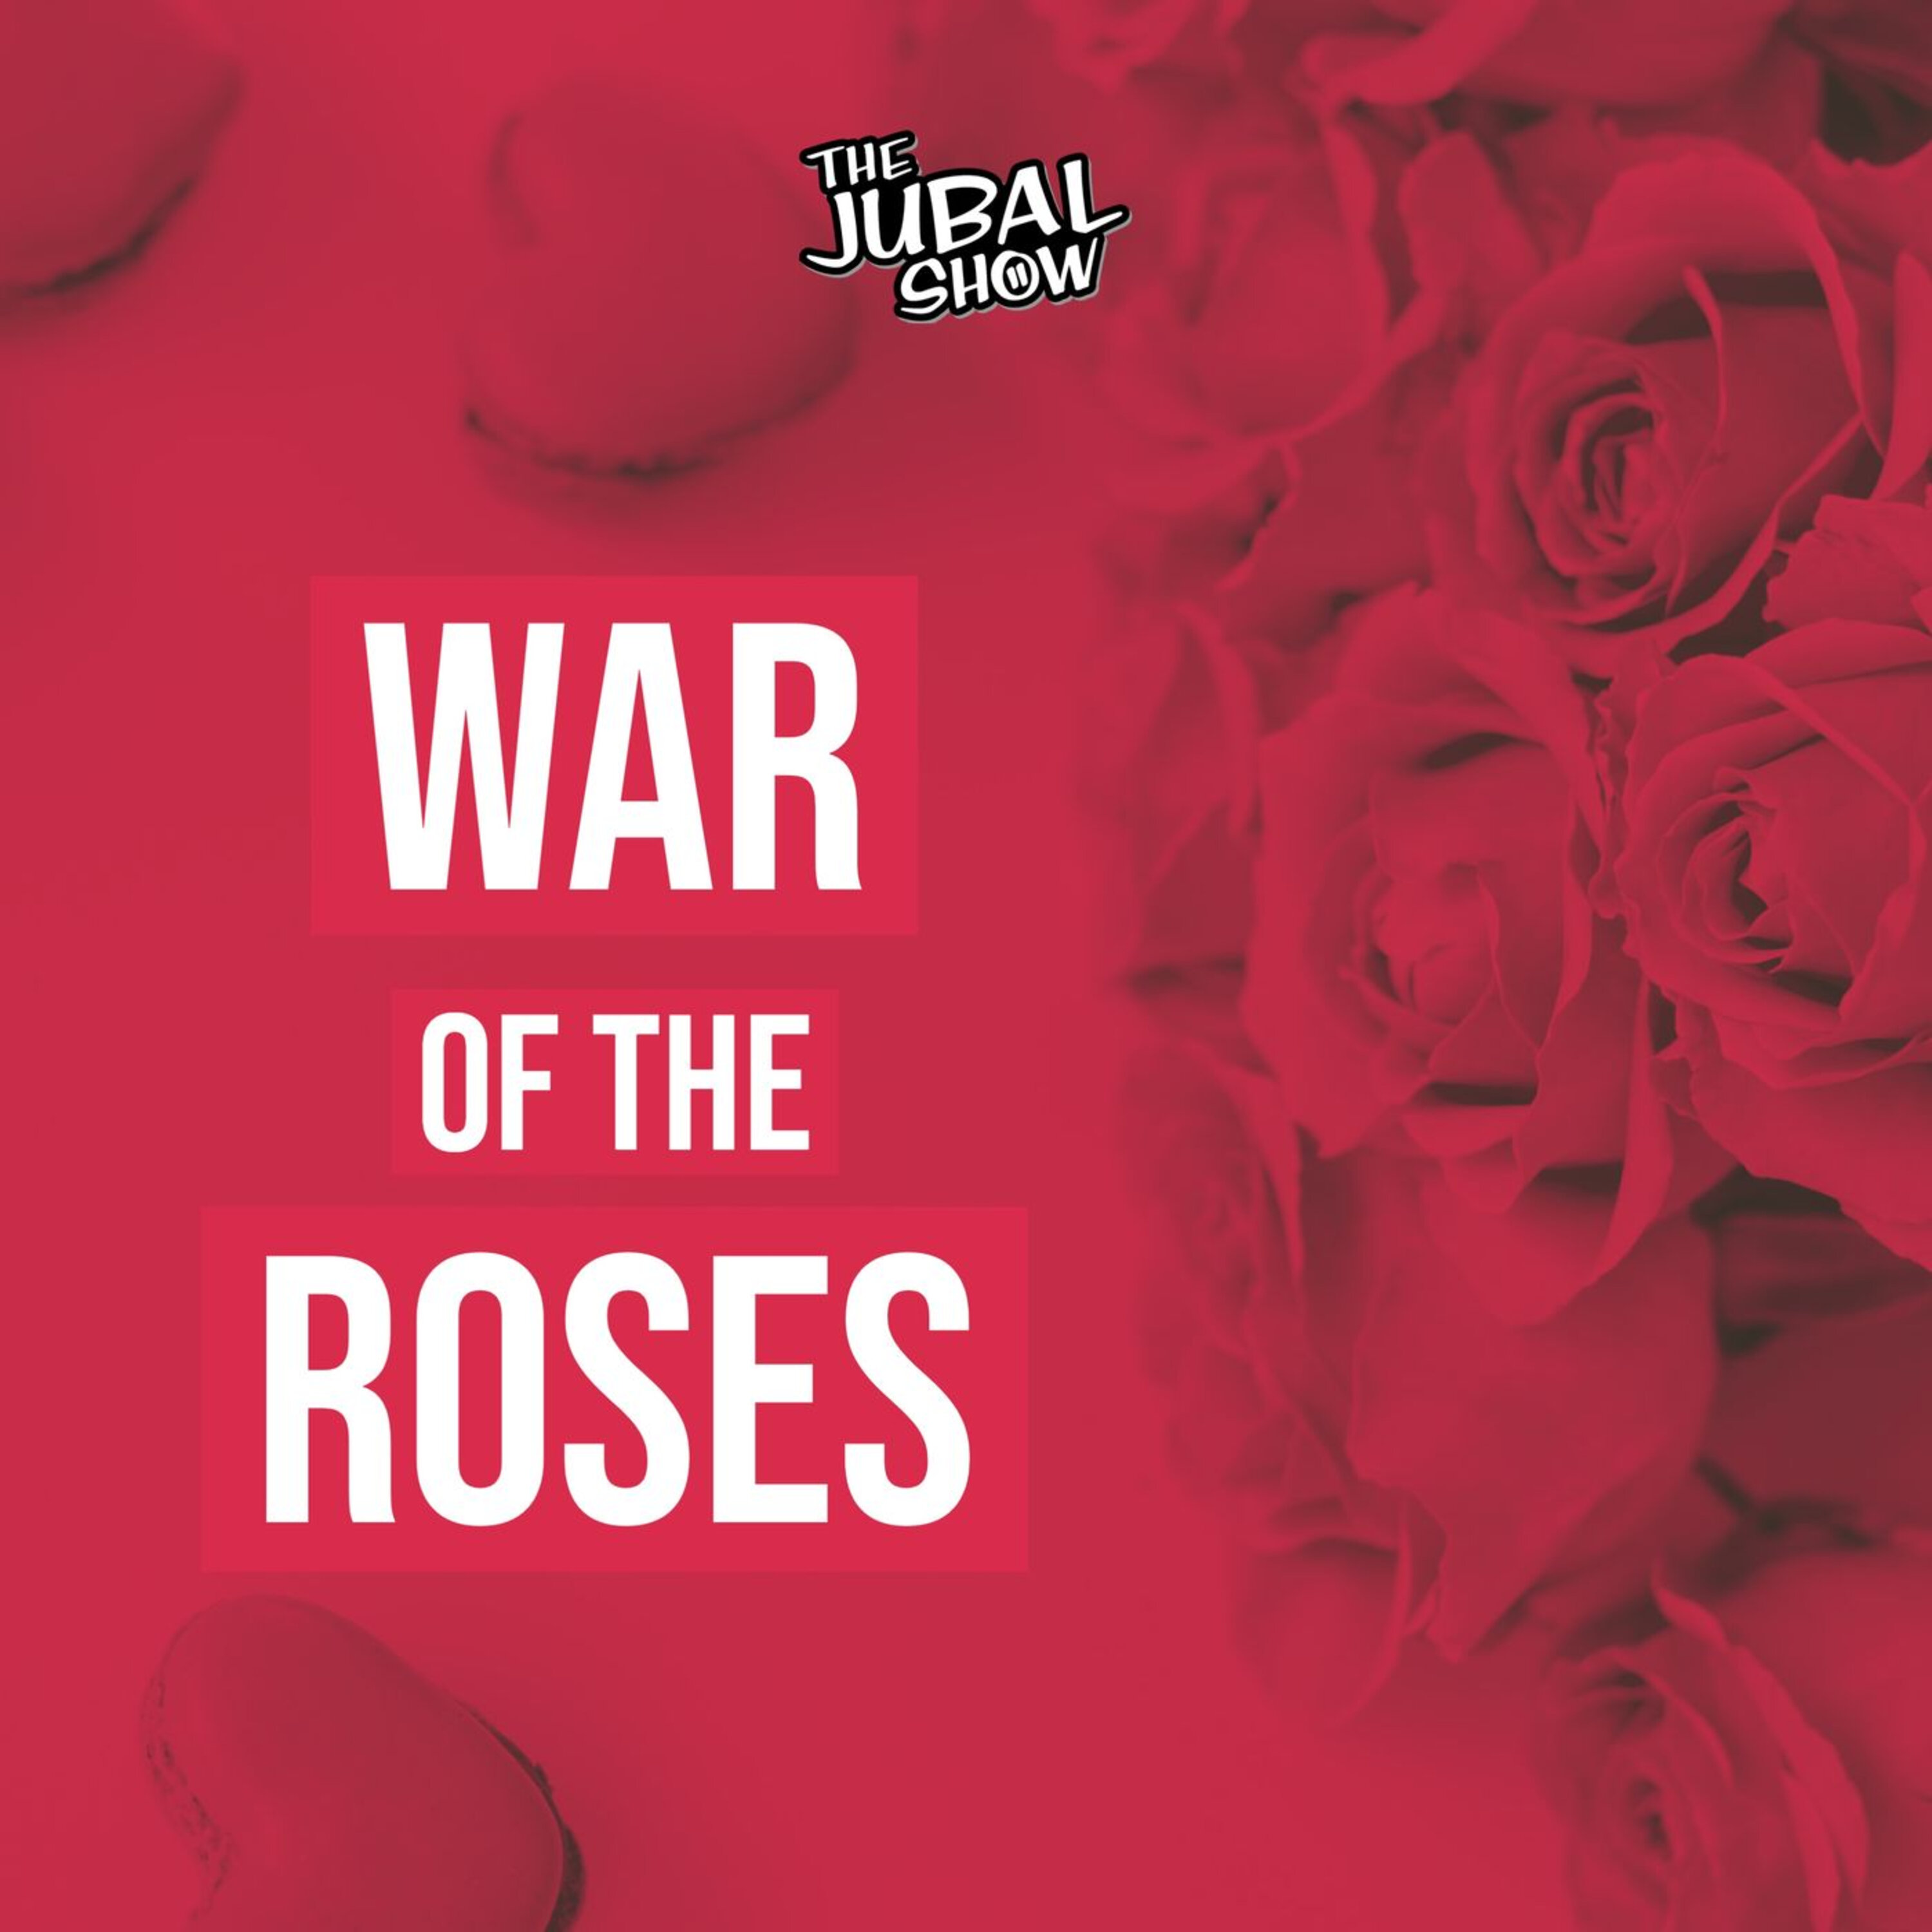 The Jubal Show is served a cheater in War of the Roses!